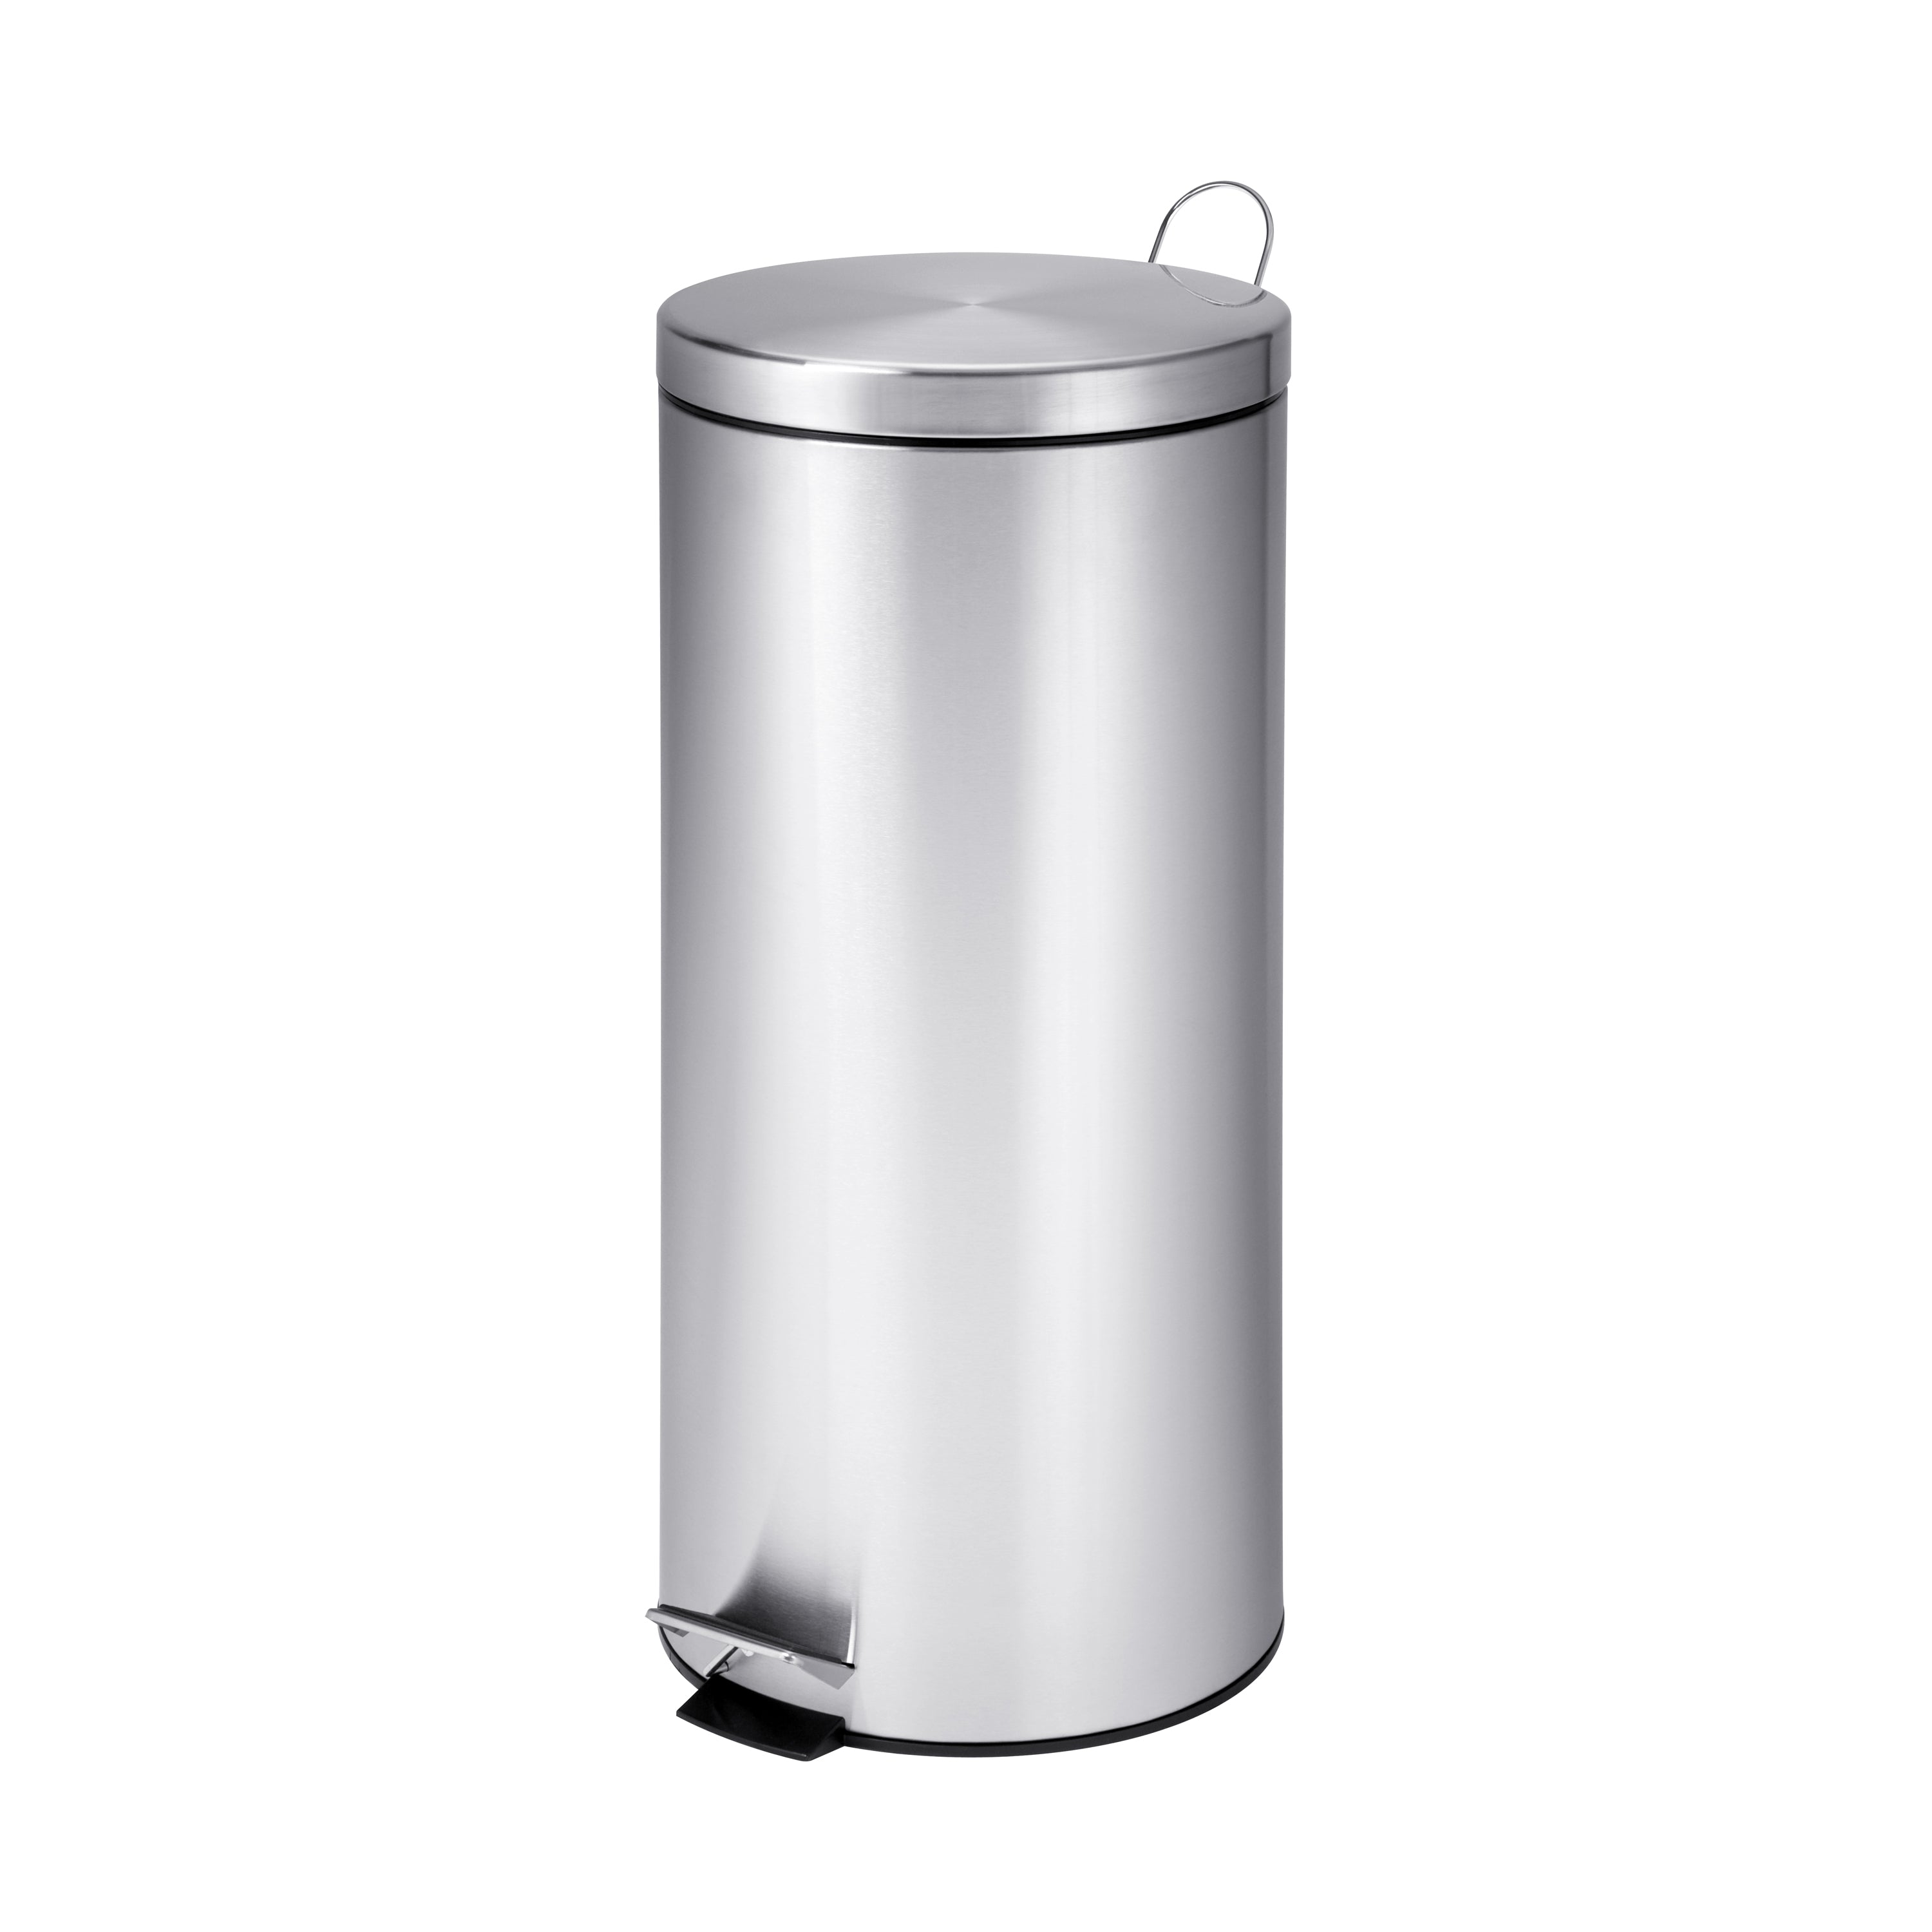 Honey-Can-Do 8 Gallon Round Stainless Steel Kitchen Step Trash Can, Silver - image 1 of 3